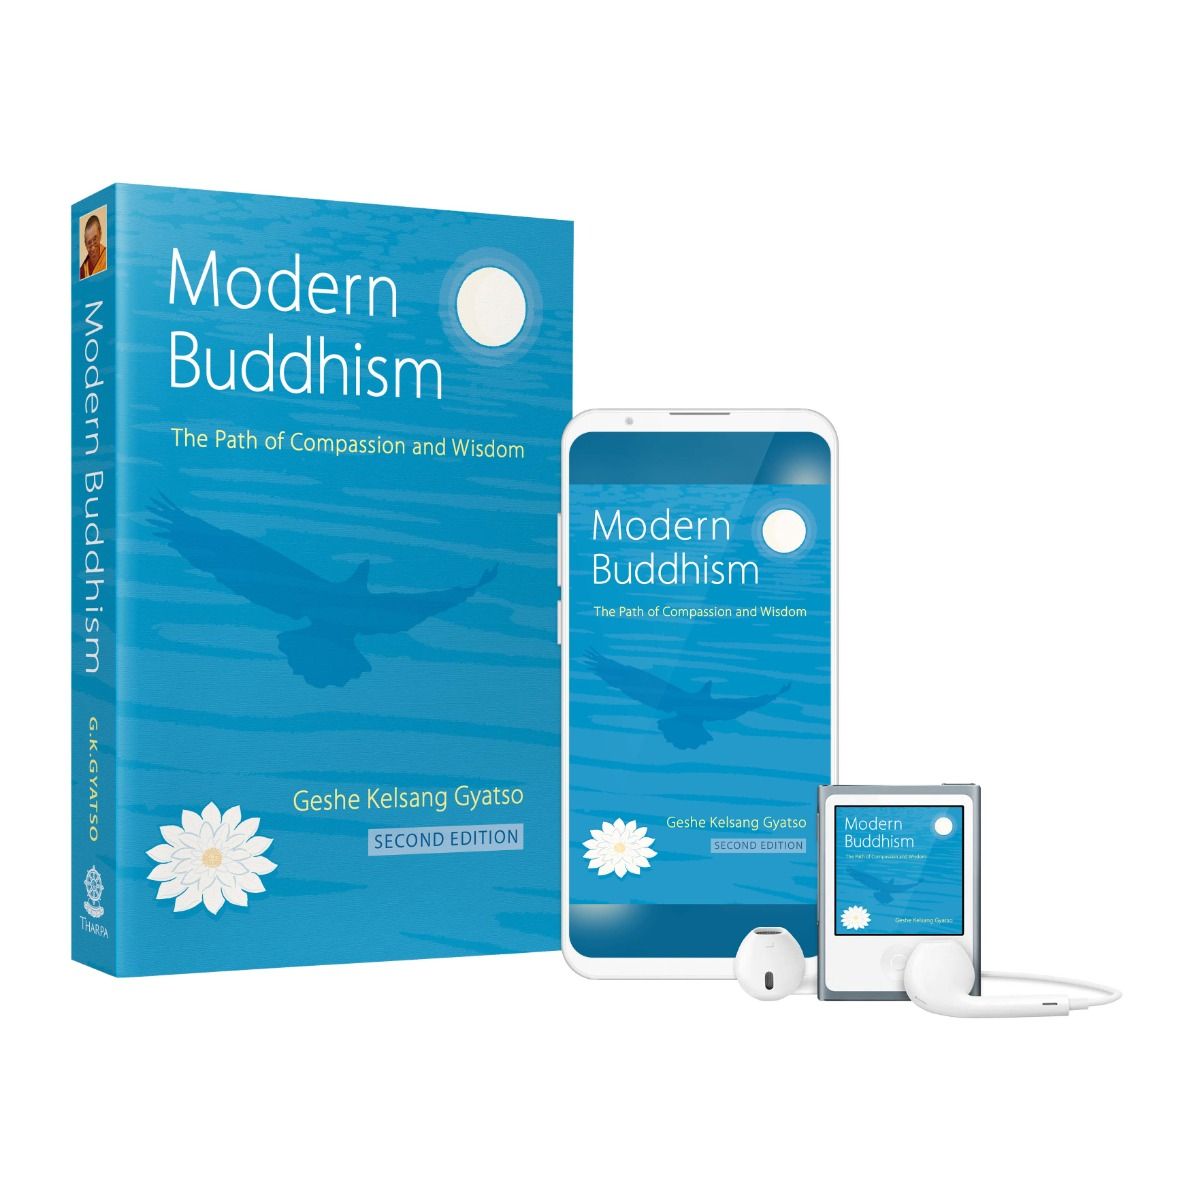 modern-buddhism_3d-paperback-front_ebook_audio_combo_2021-12